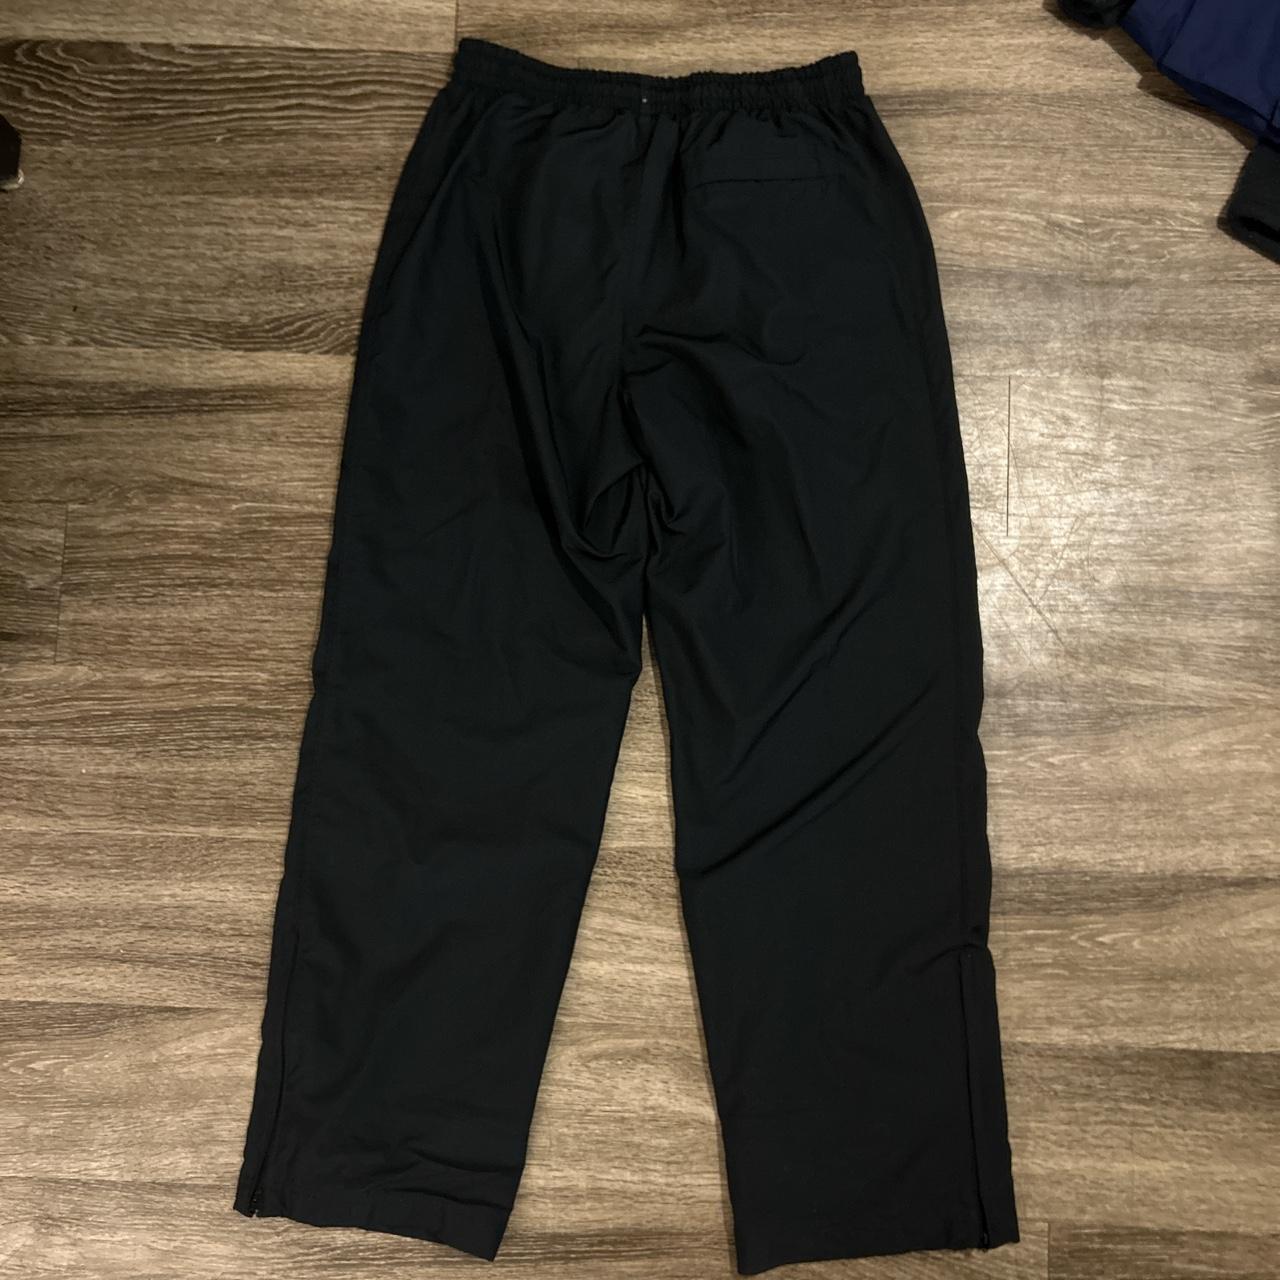 Nike Men's Black and Grey Joggers-tracksuits (4)